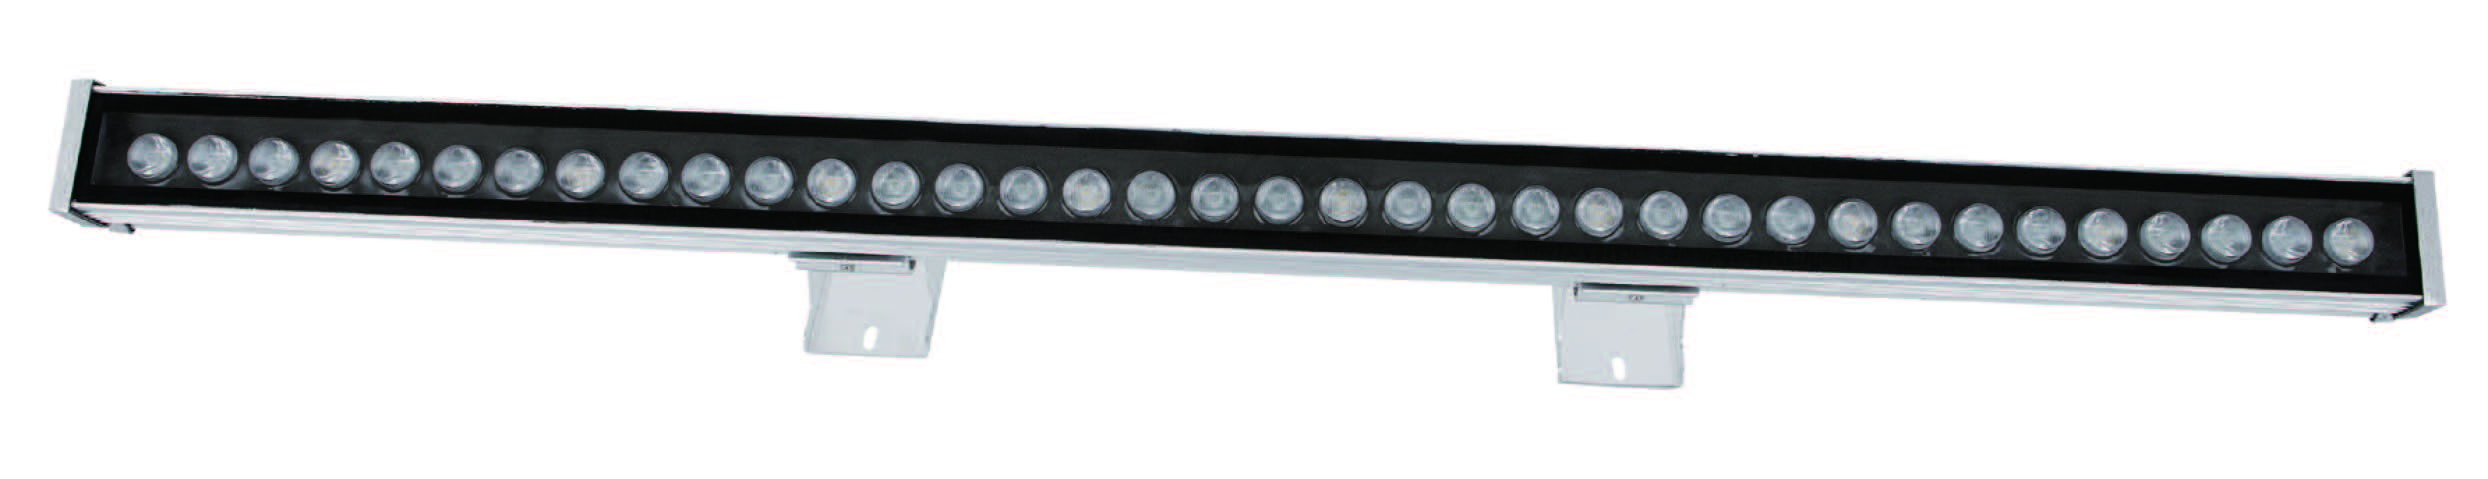 LED Wall Washer - copy - copy